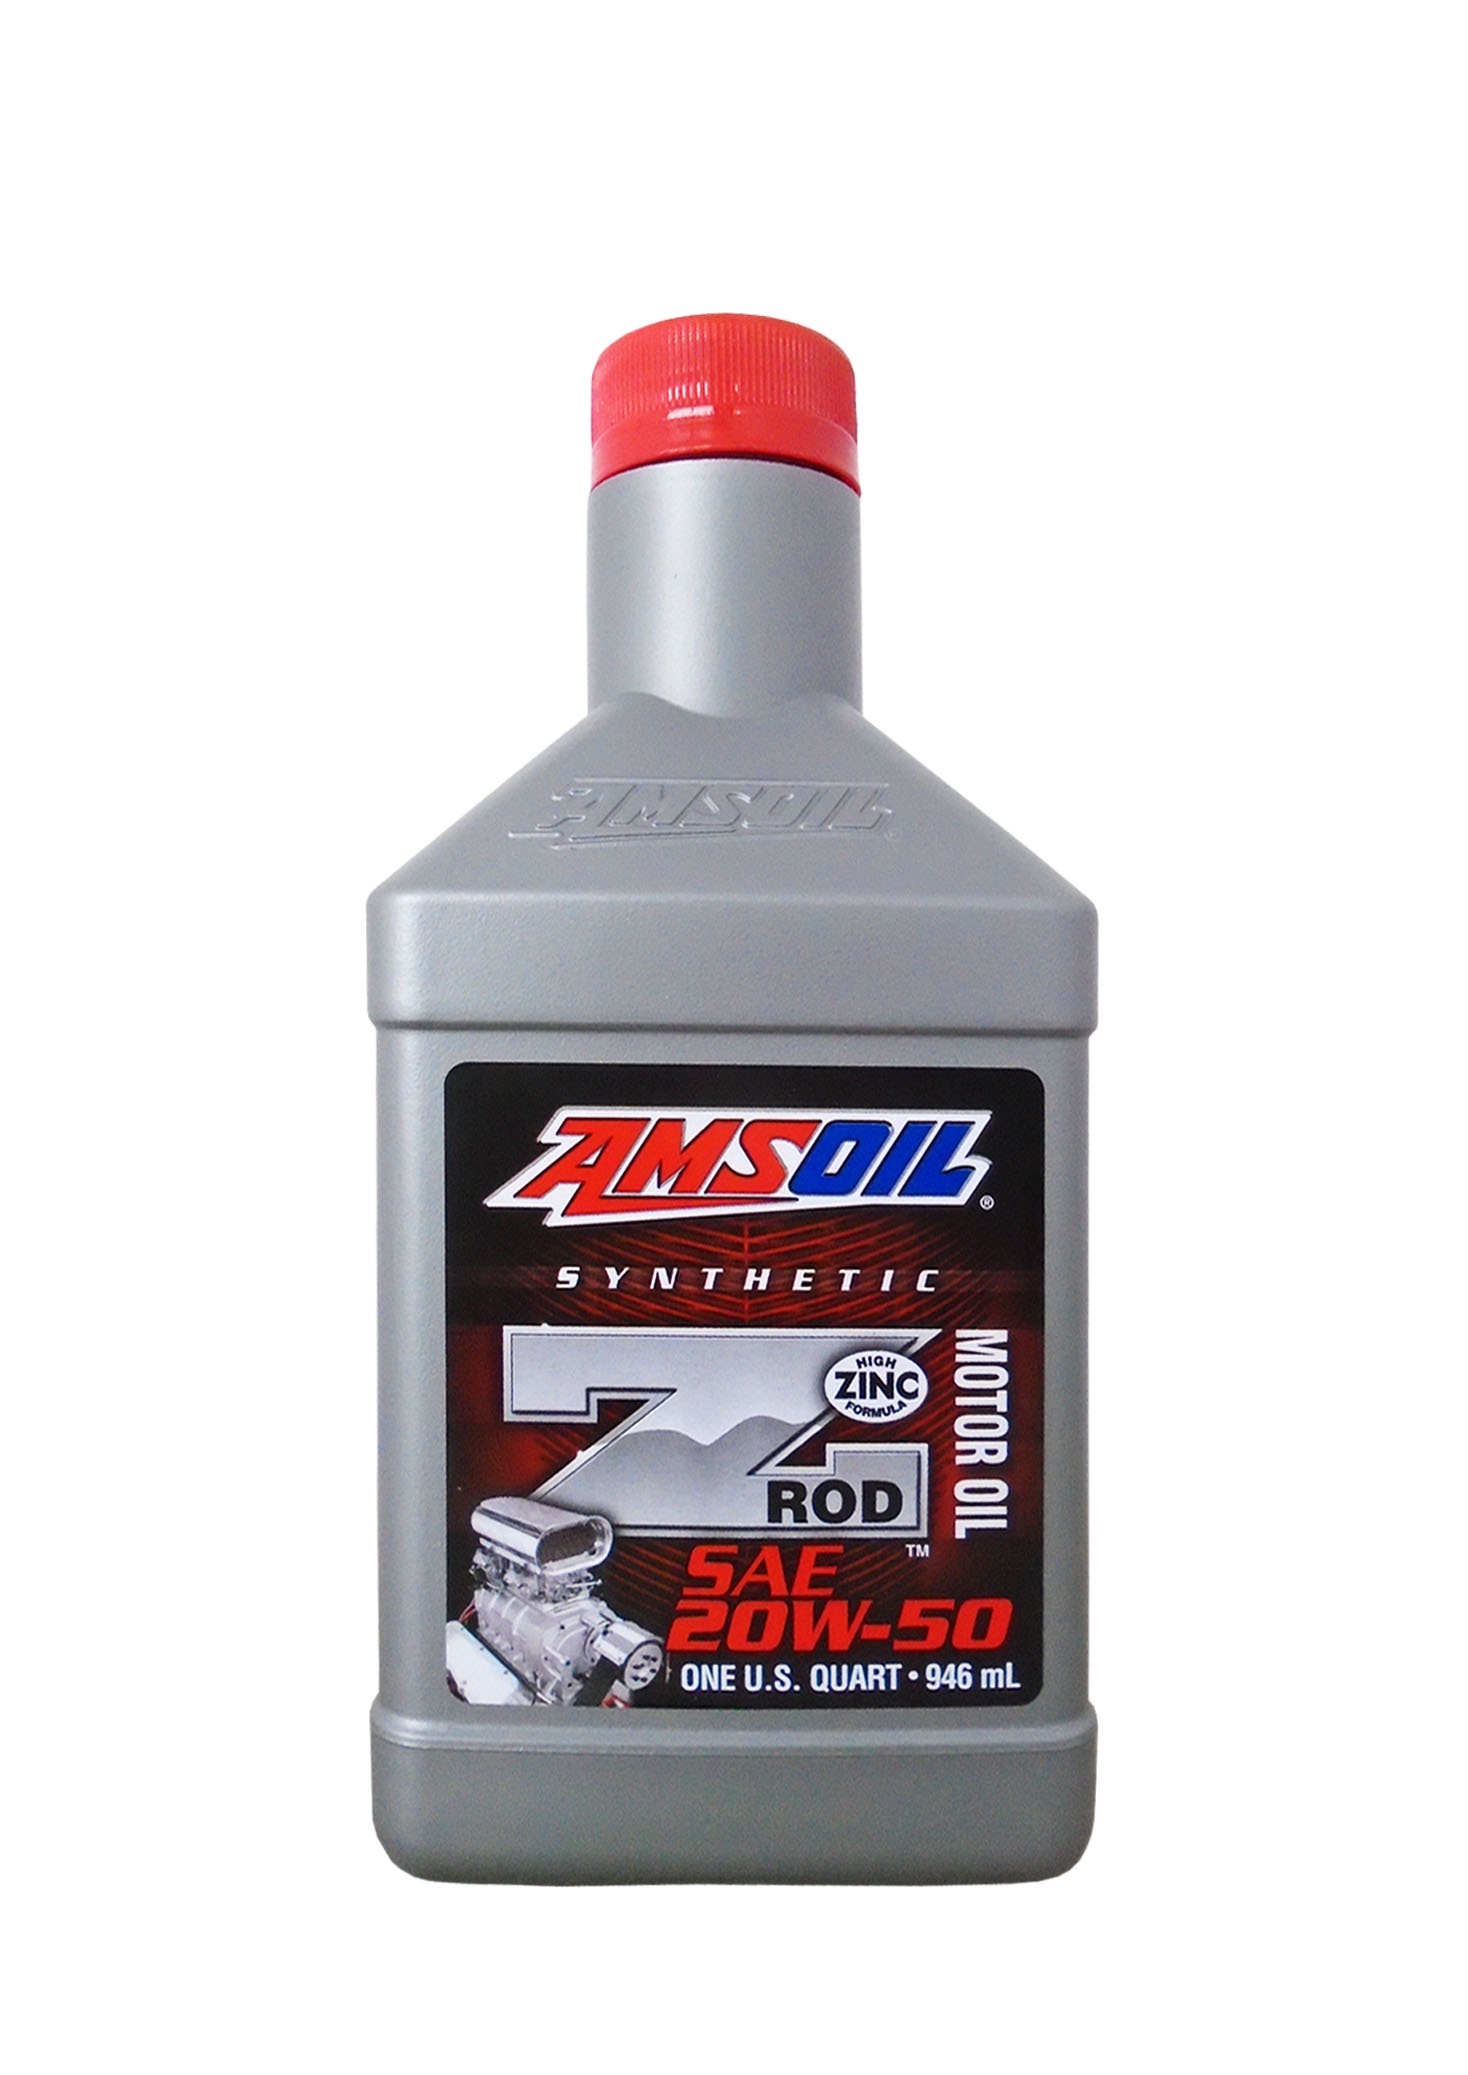 фото Моторное масло AMSOIL Z-Rod Synthetic Motor Oil SAE 20W-50 (0,946л)